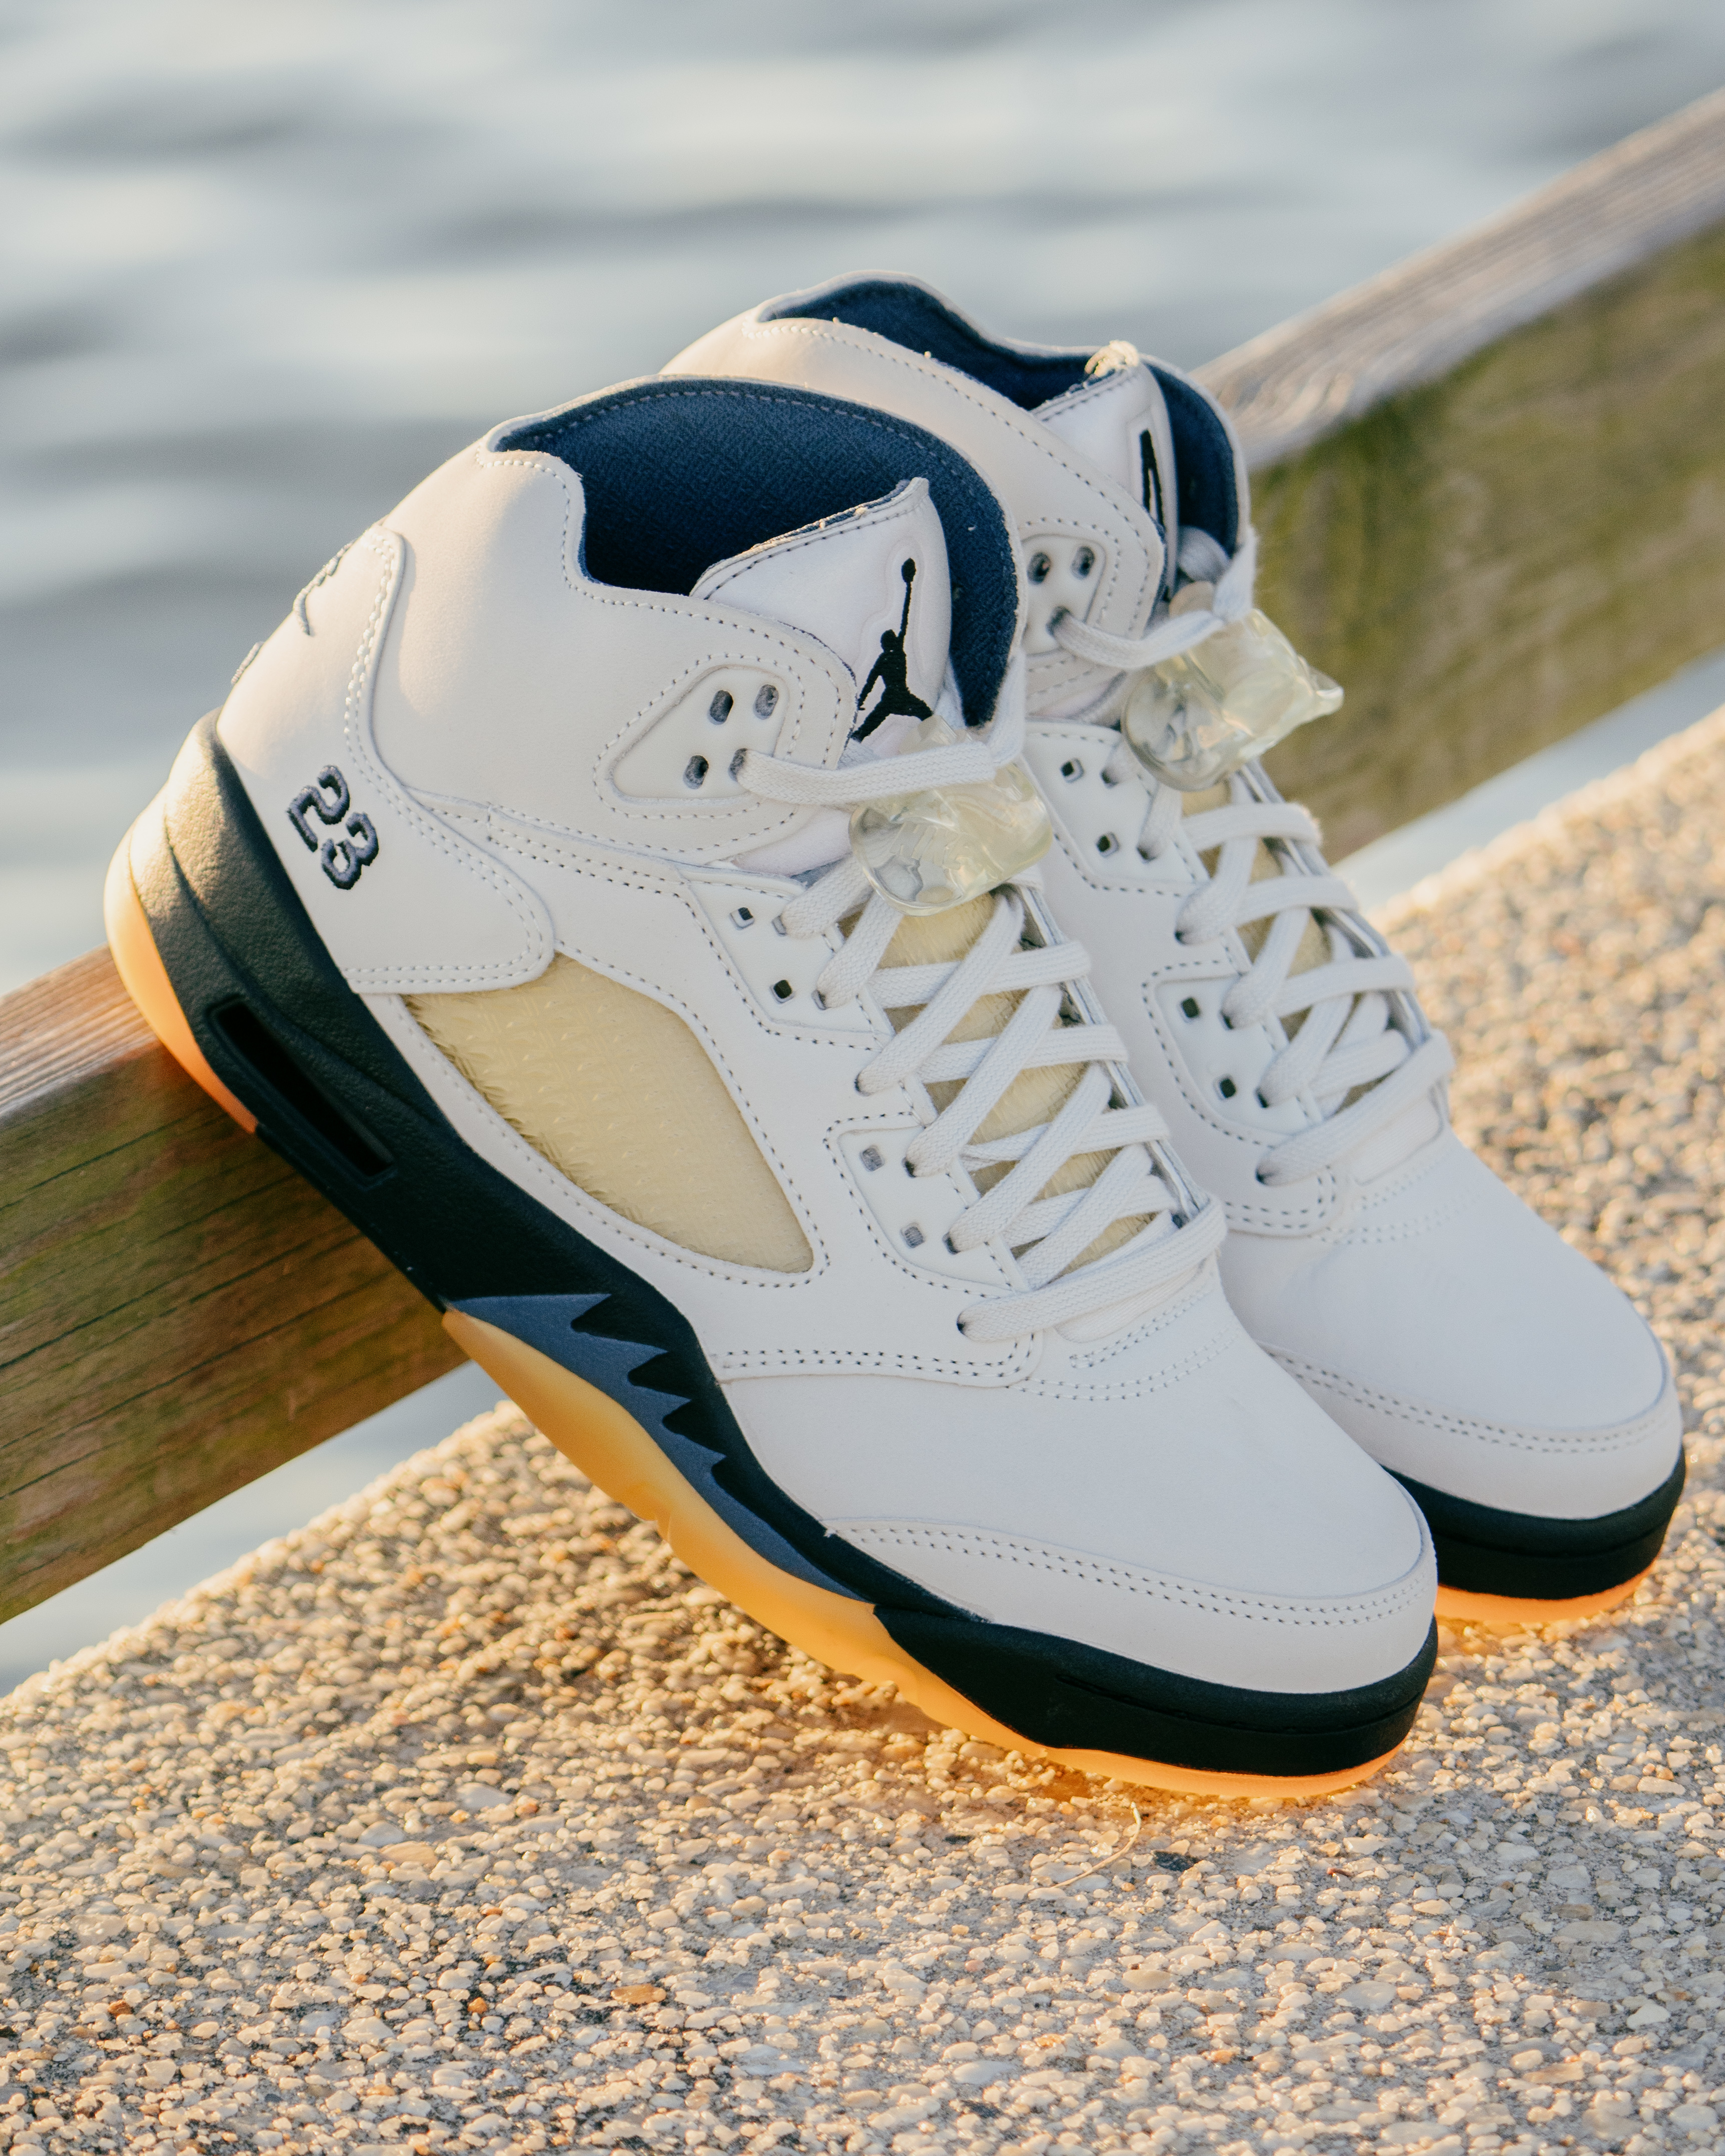 A Ma Maniere Addresses Release Issues for Air Jordan 5 Collab ...